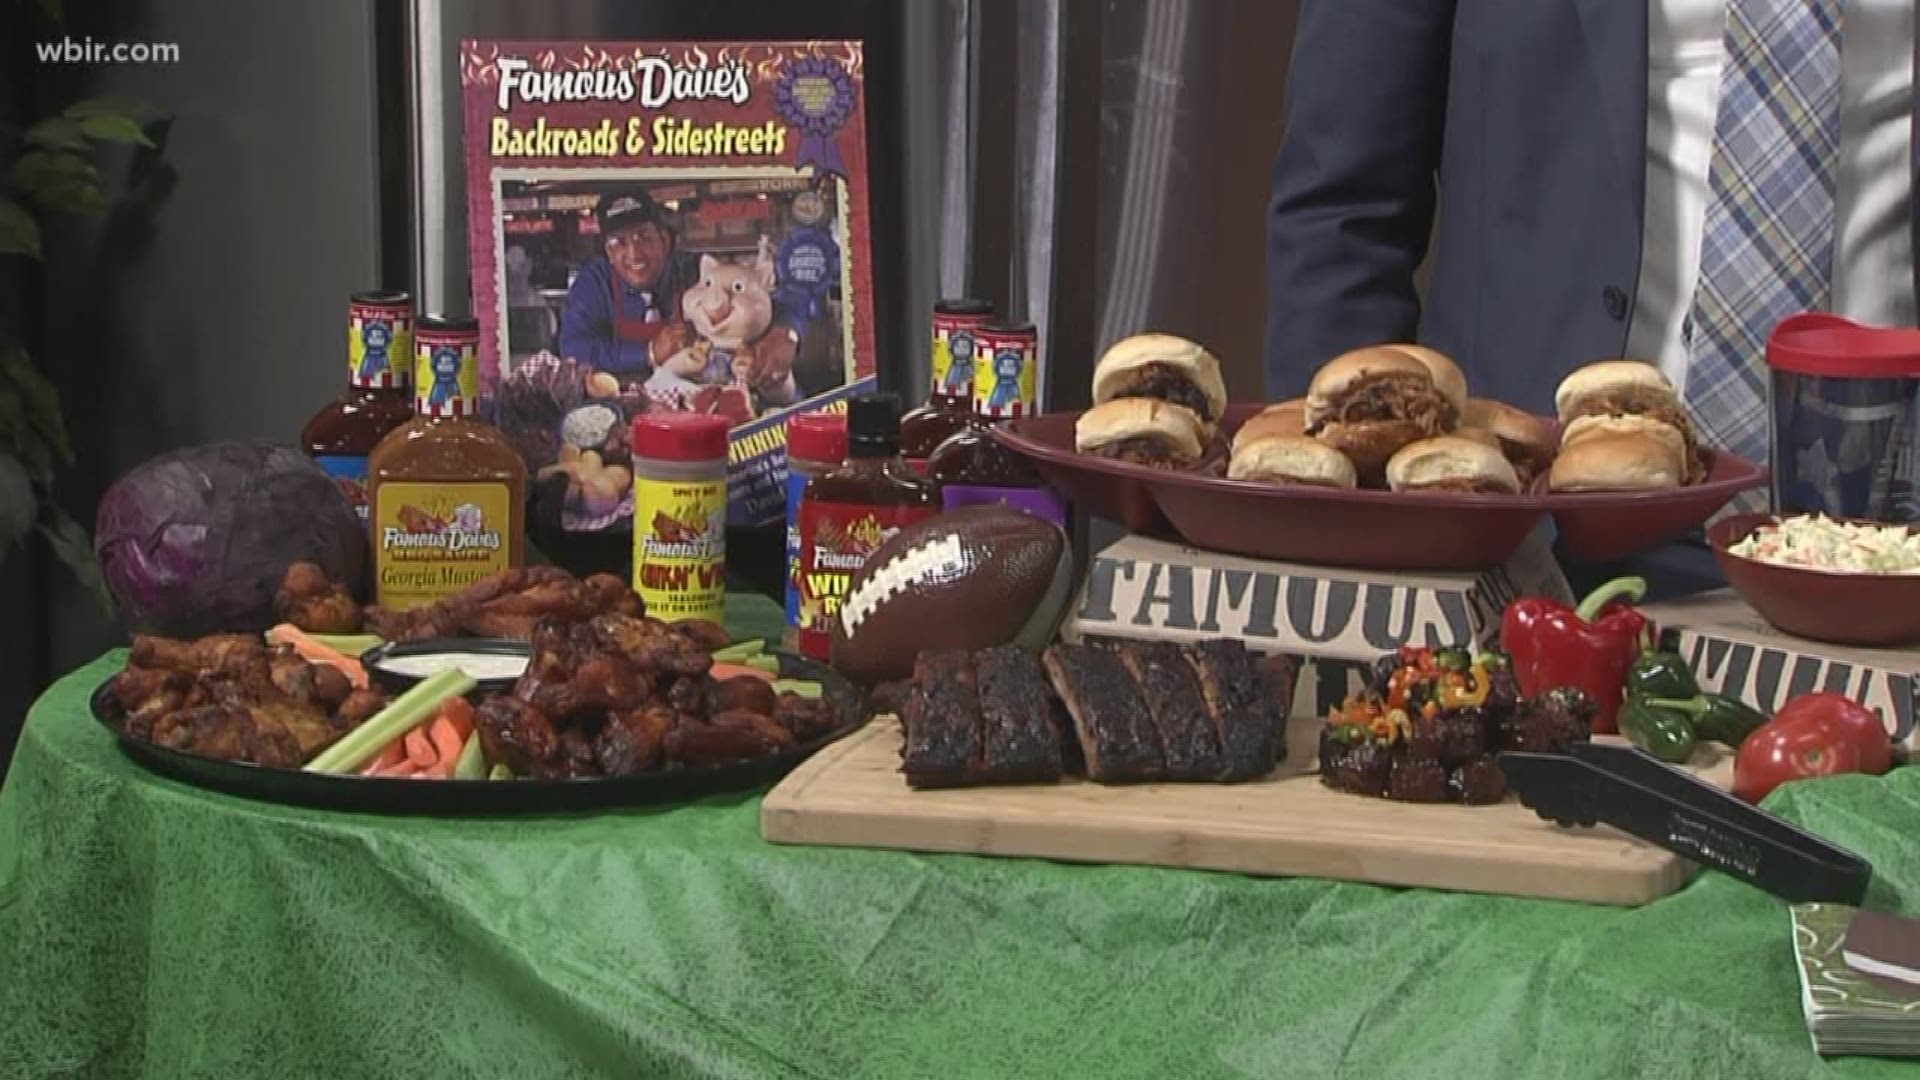 Famous Dave's brought Great Balls of Fire meatballs and more to the kitchen to help you prepare for the Super Bowl and other events.